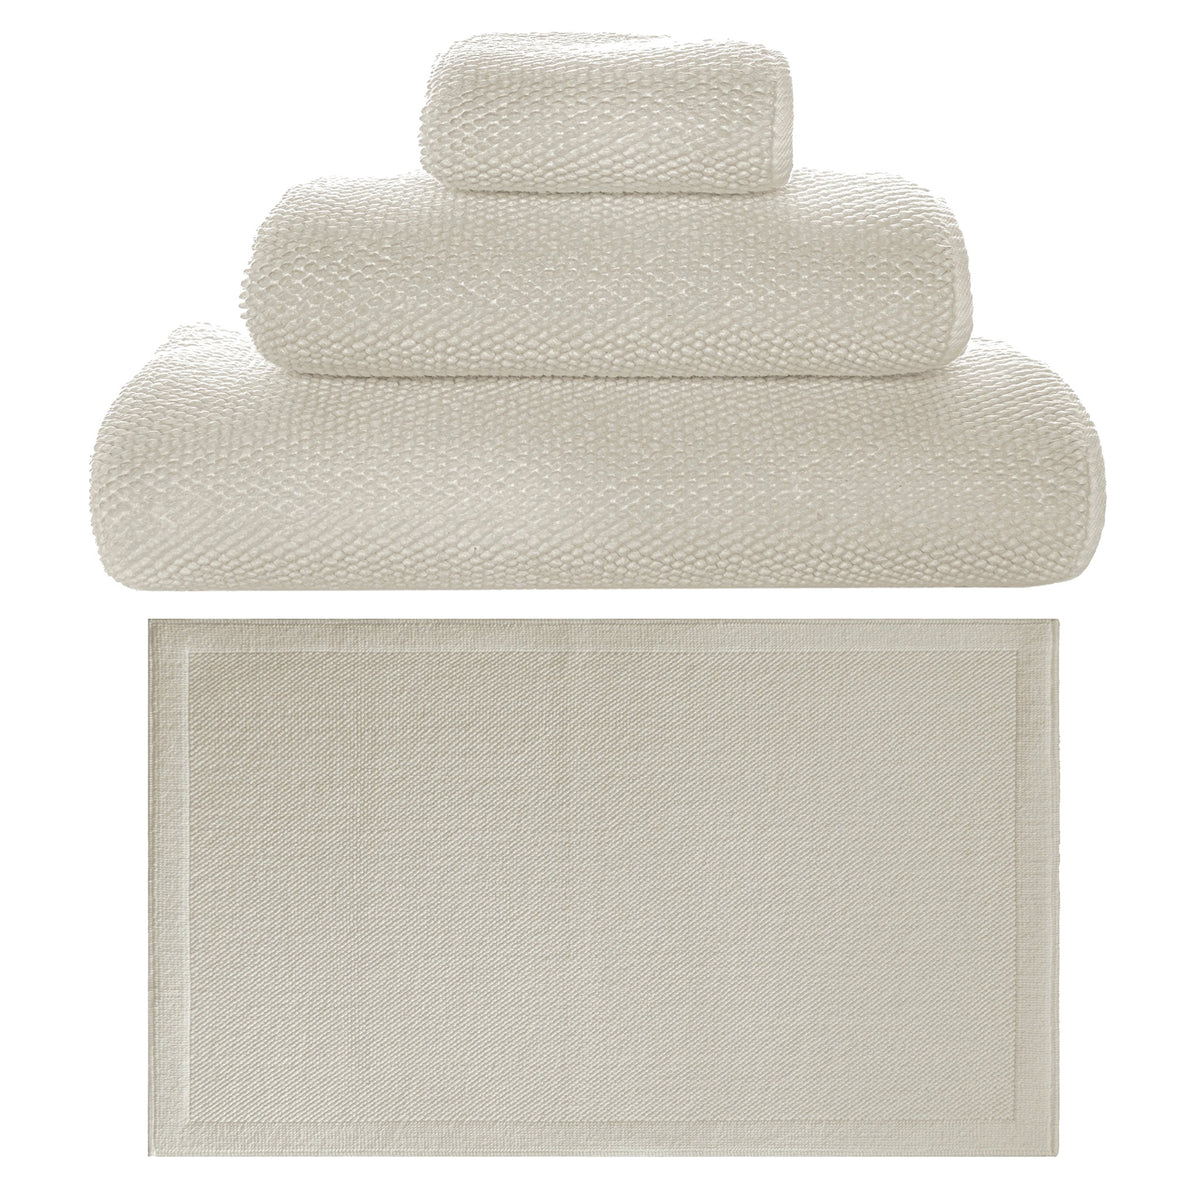 Image of Graccioza Pearls Bath Towels and Rugs in Color Fog